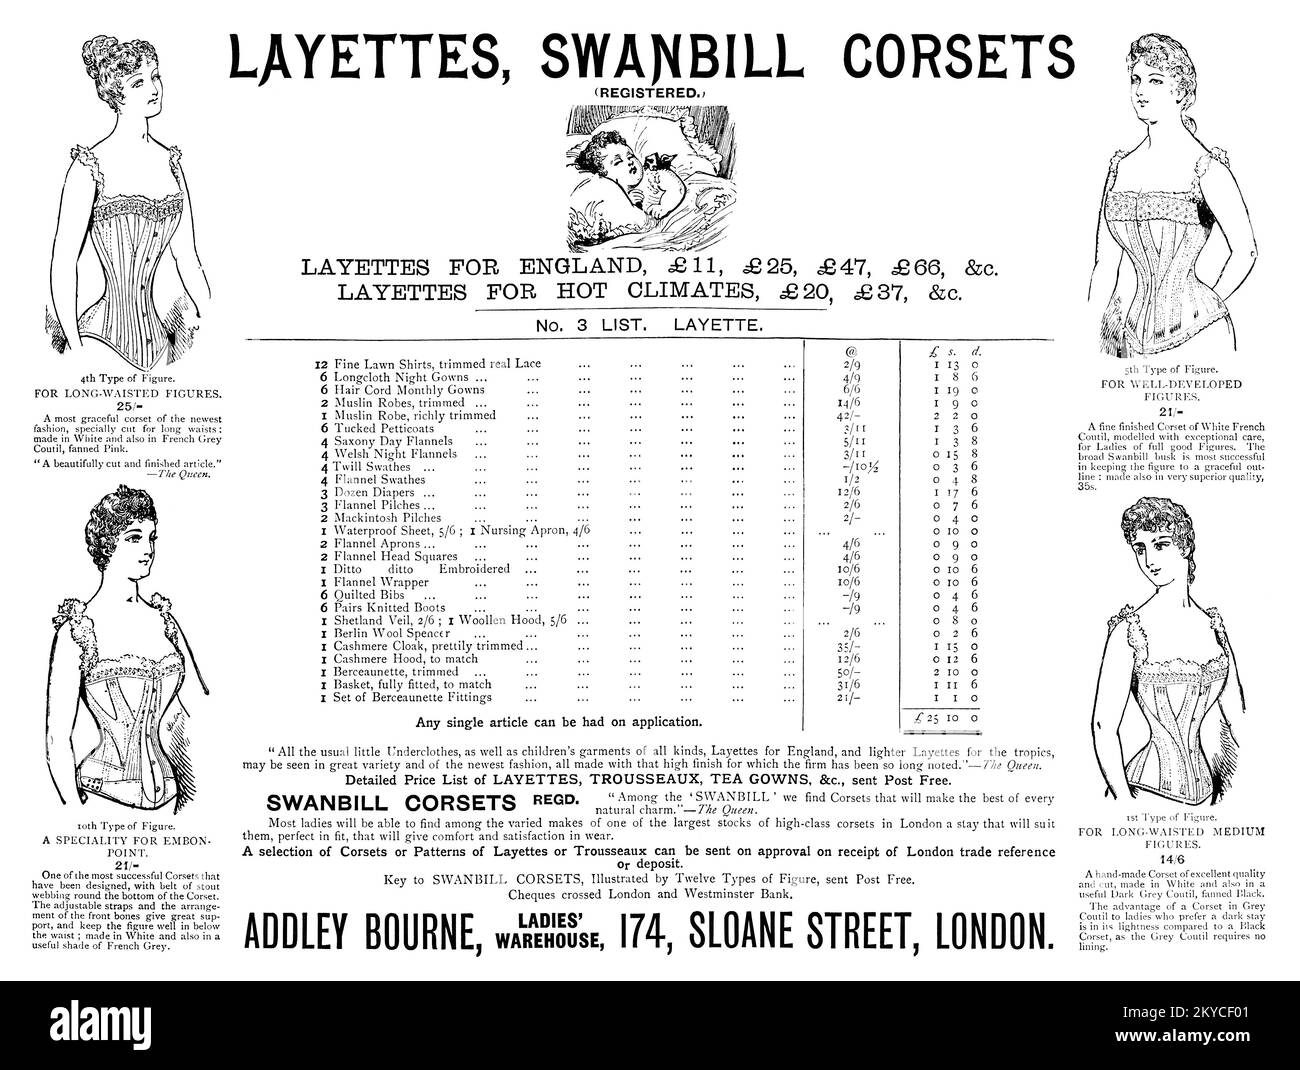 1892 Victorian British advertisement for layettes and corsets from Addley Bourne Ladies' Warehouse in London. Stock Photo